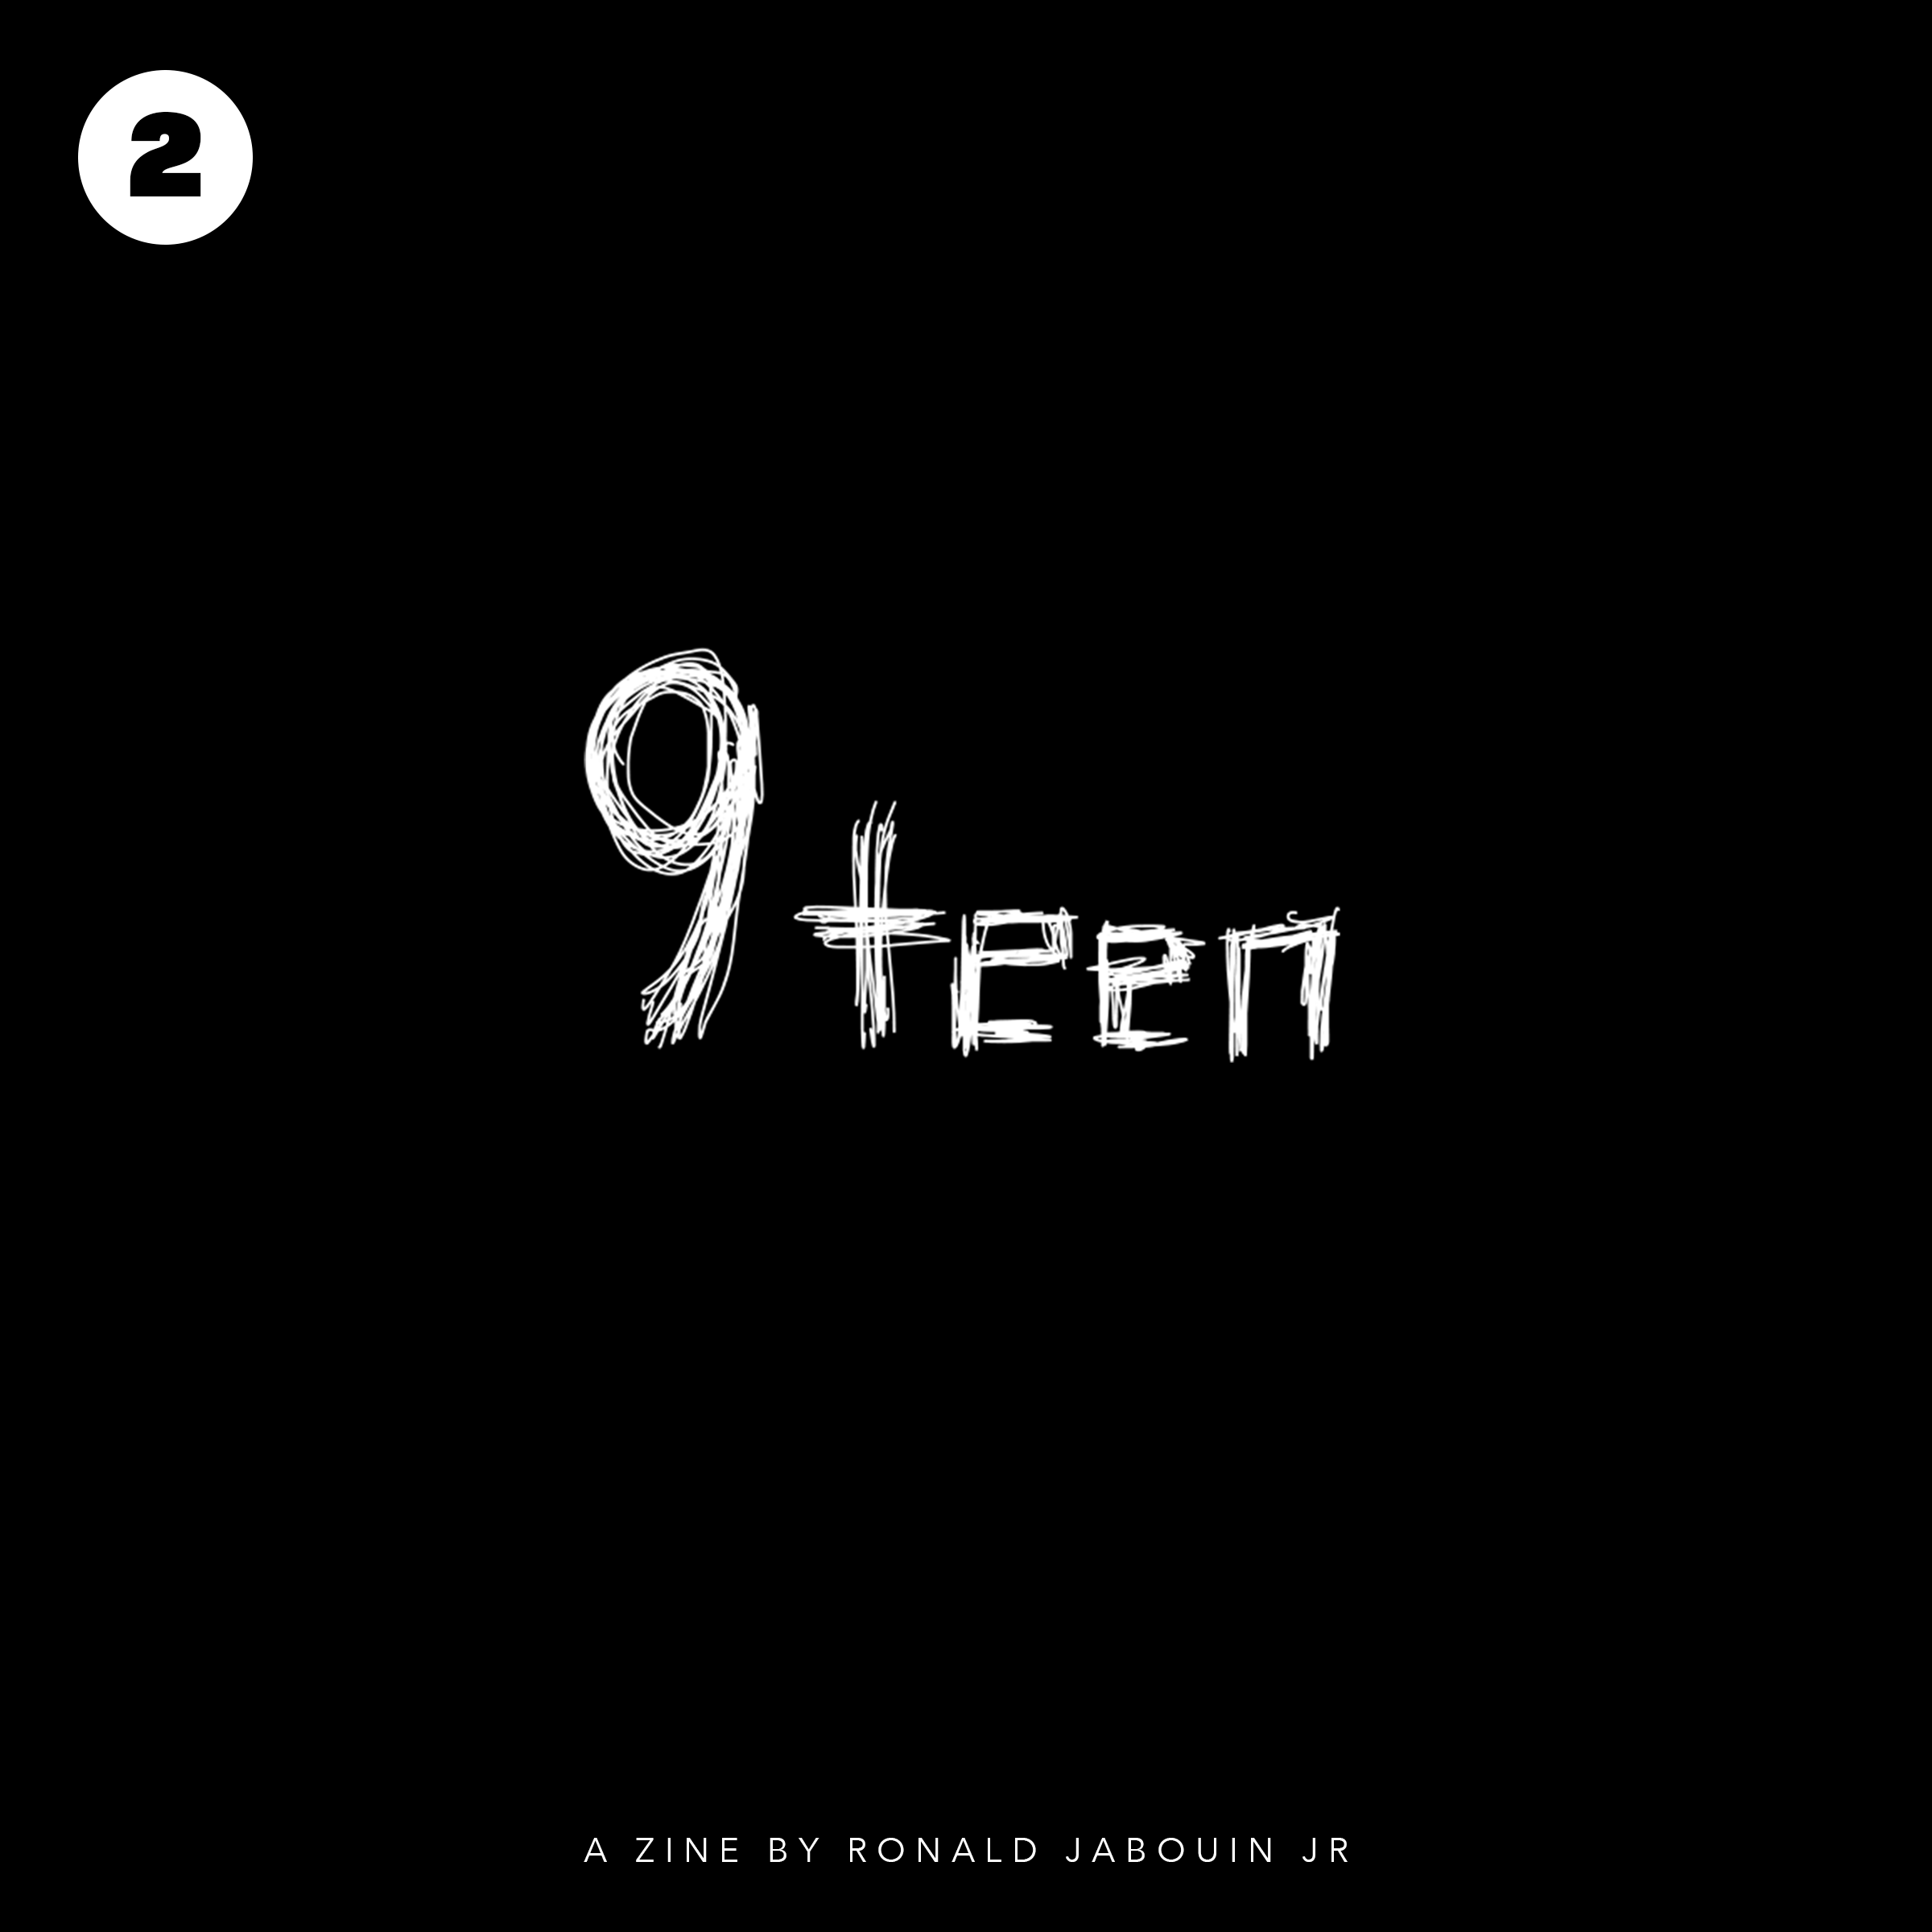 cover for my zine titled '9teen'